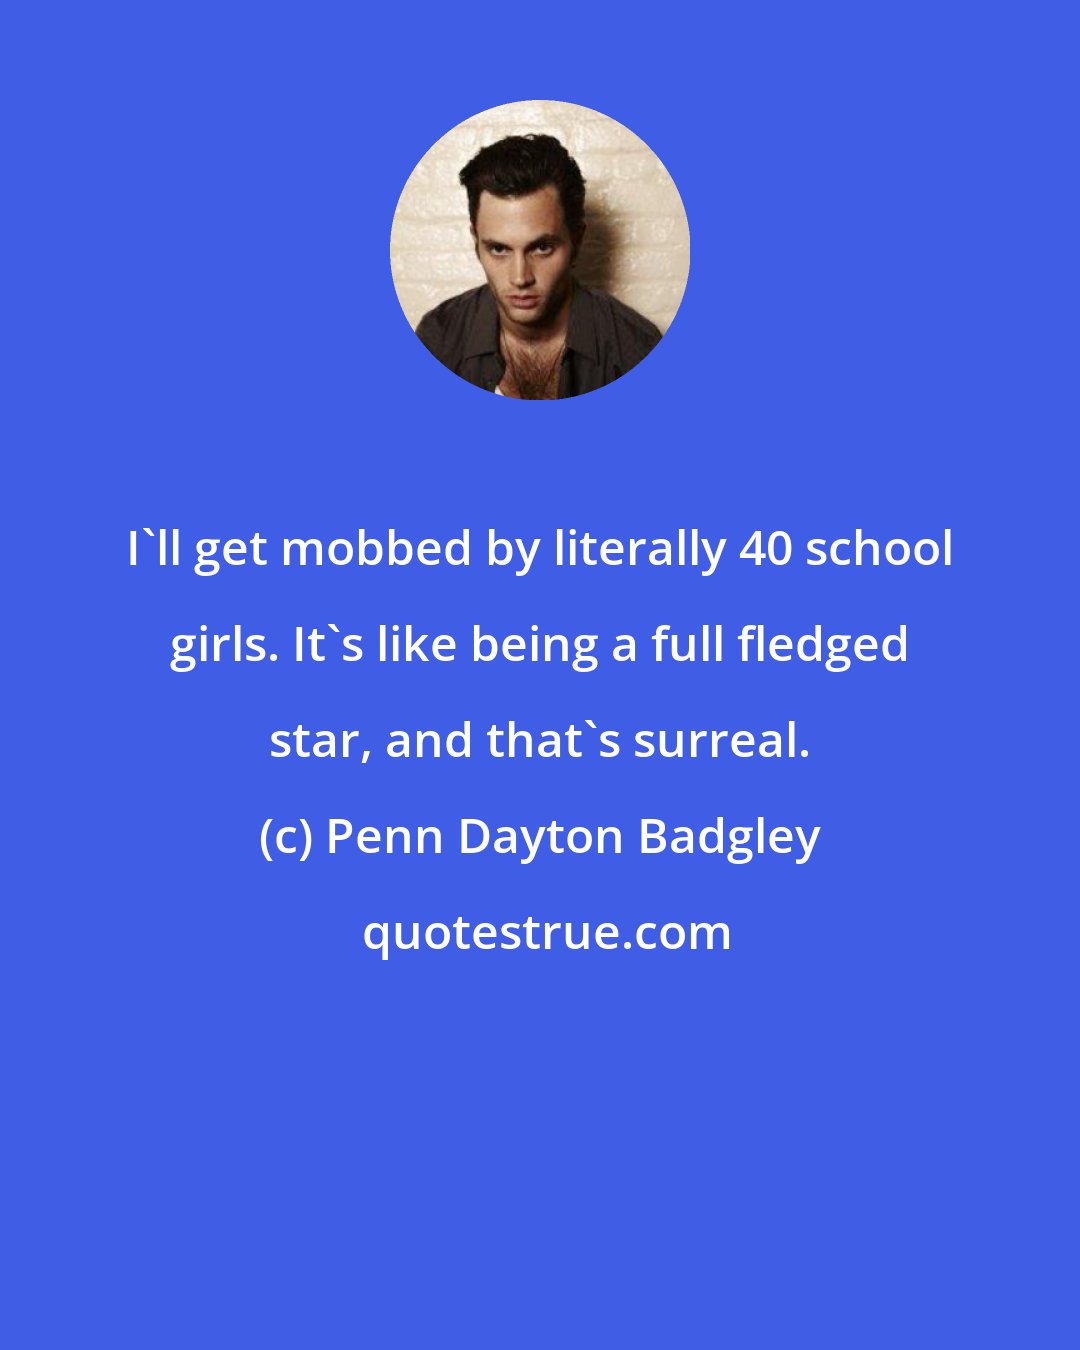 Penn Dayton Badgley: I'll get mobbed by literally 40 school girls. It's like being a full fledged star, and that's surreal.